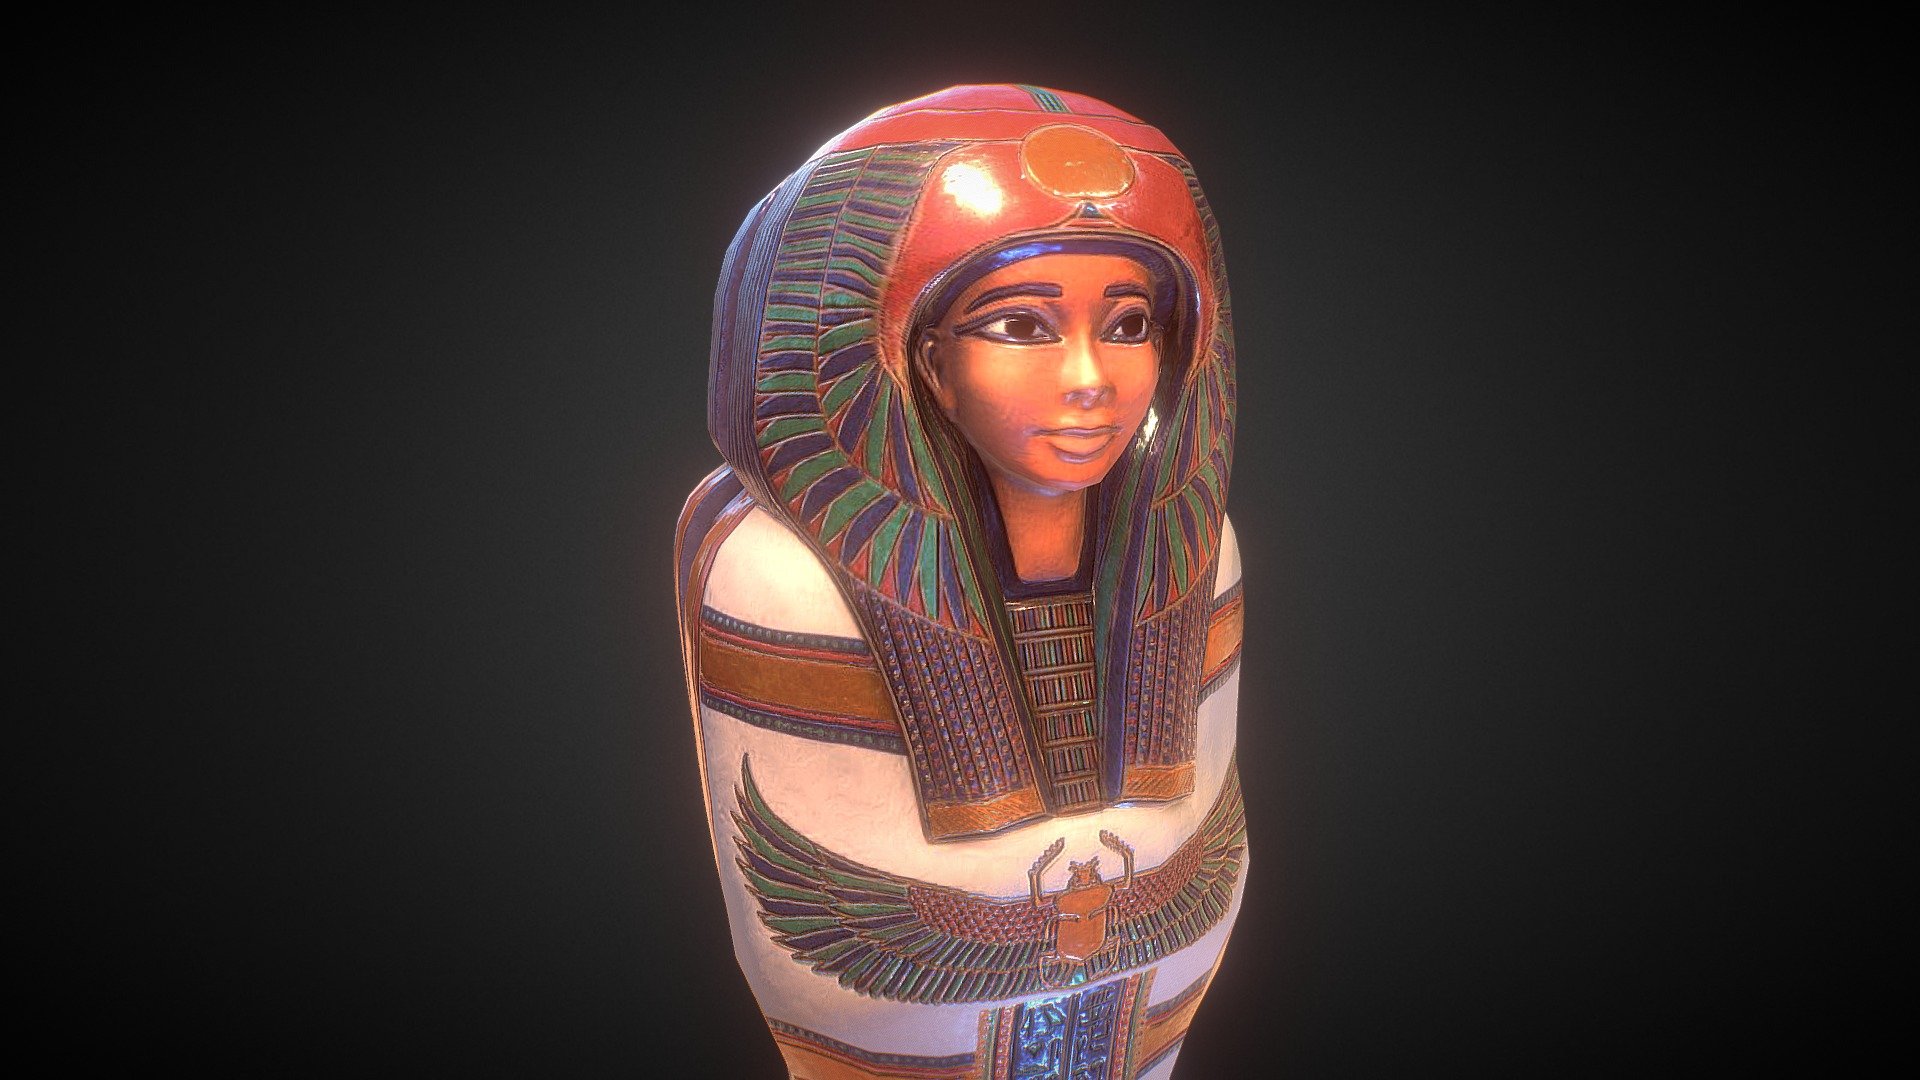 I have made vivid colors because the Egyptian elements I'm working on are an interpretation of what they could have look like in the past 3d model